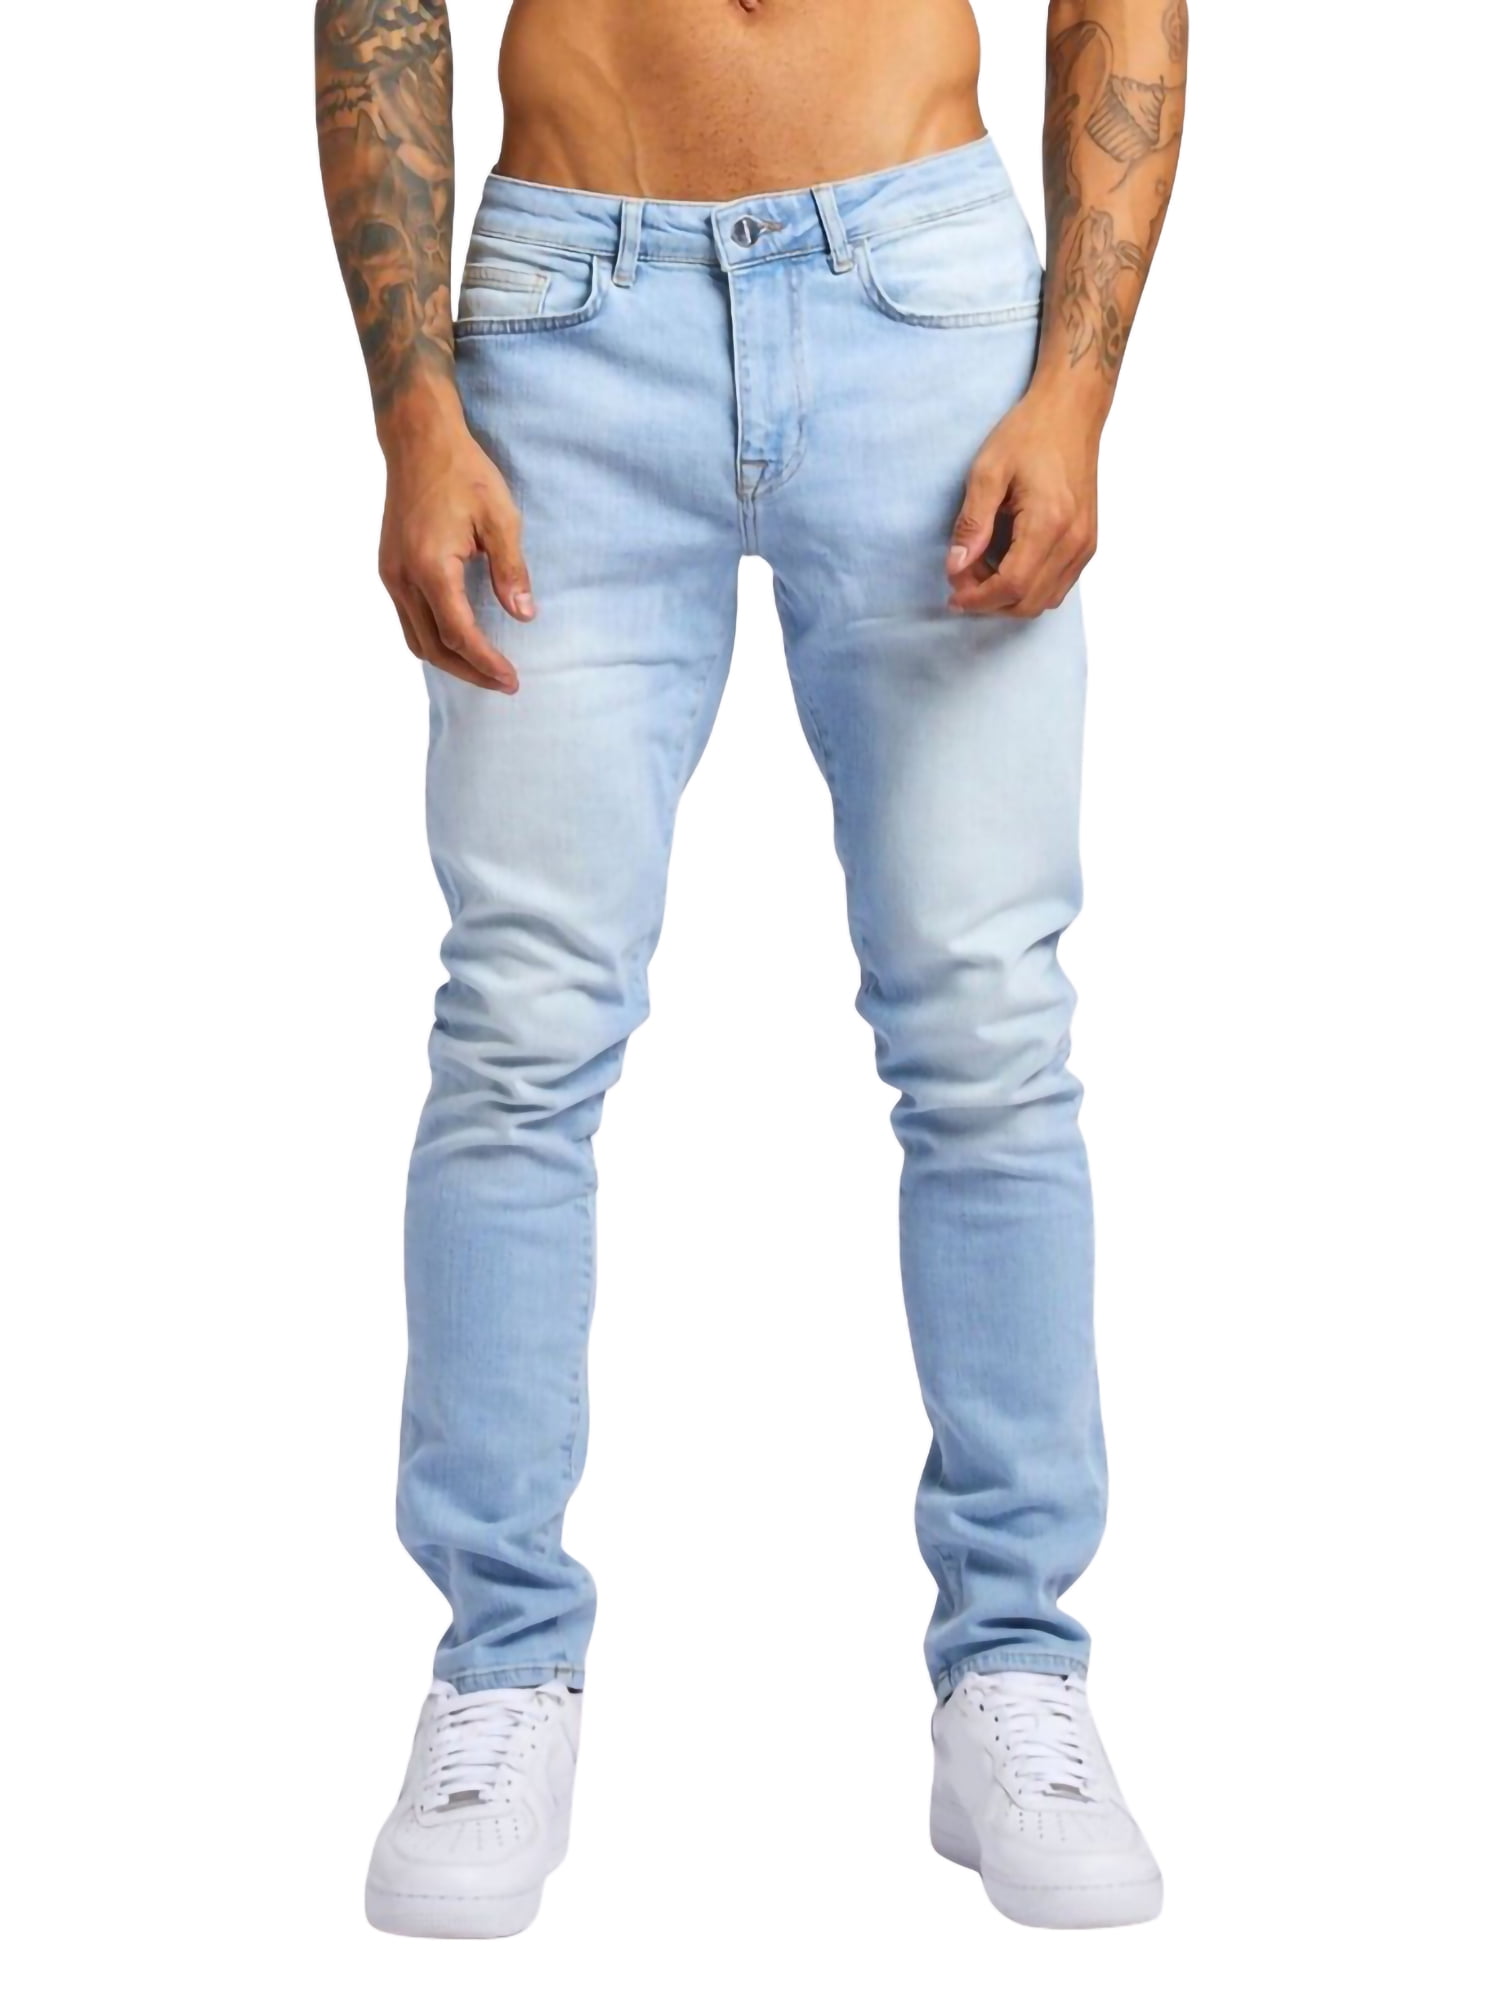 JUJIEXUN2021 Mens Skinny Holes Ripped Jeans Light Color Stretch Slim Fit  Destroyed Straight Leg Jeans Distressed Denim Pants (Light Blue,29) at  Amazon Men's Clothing store